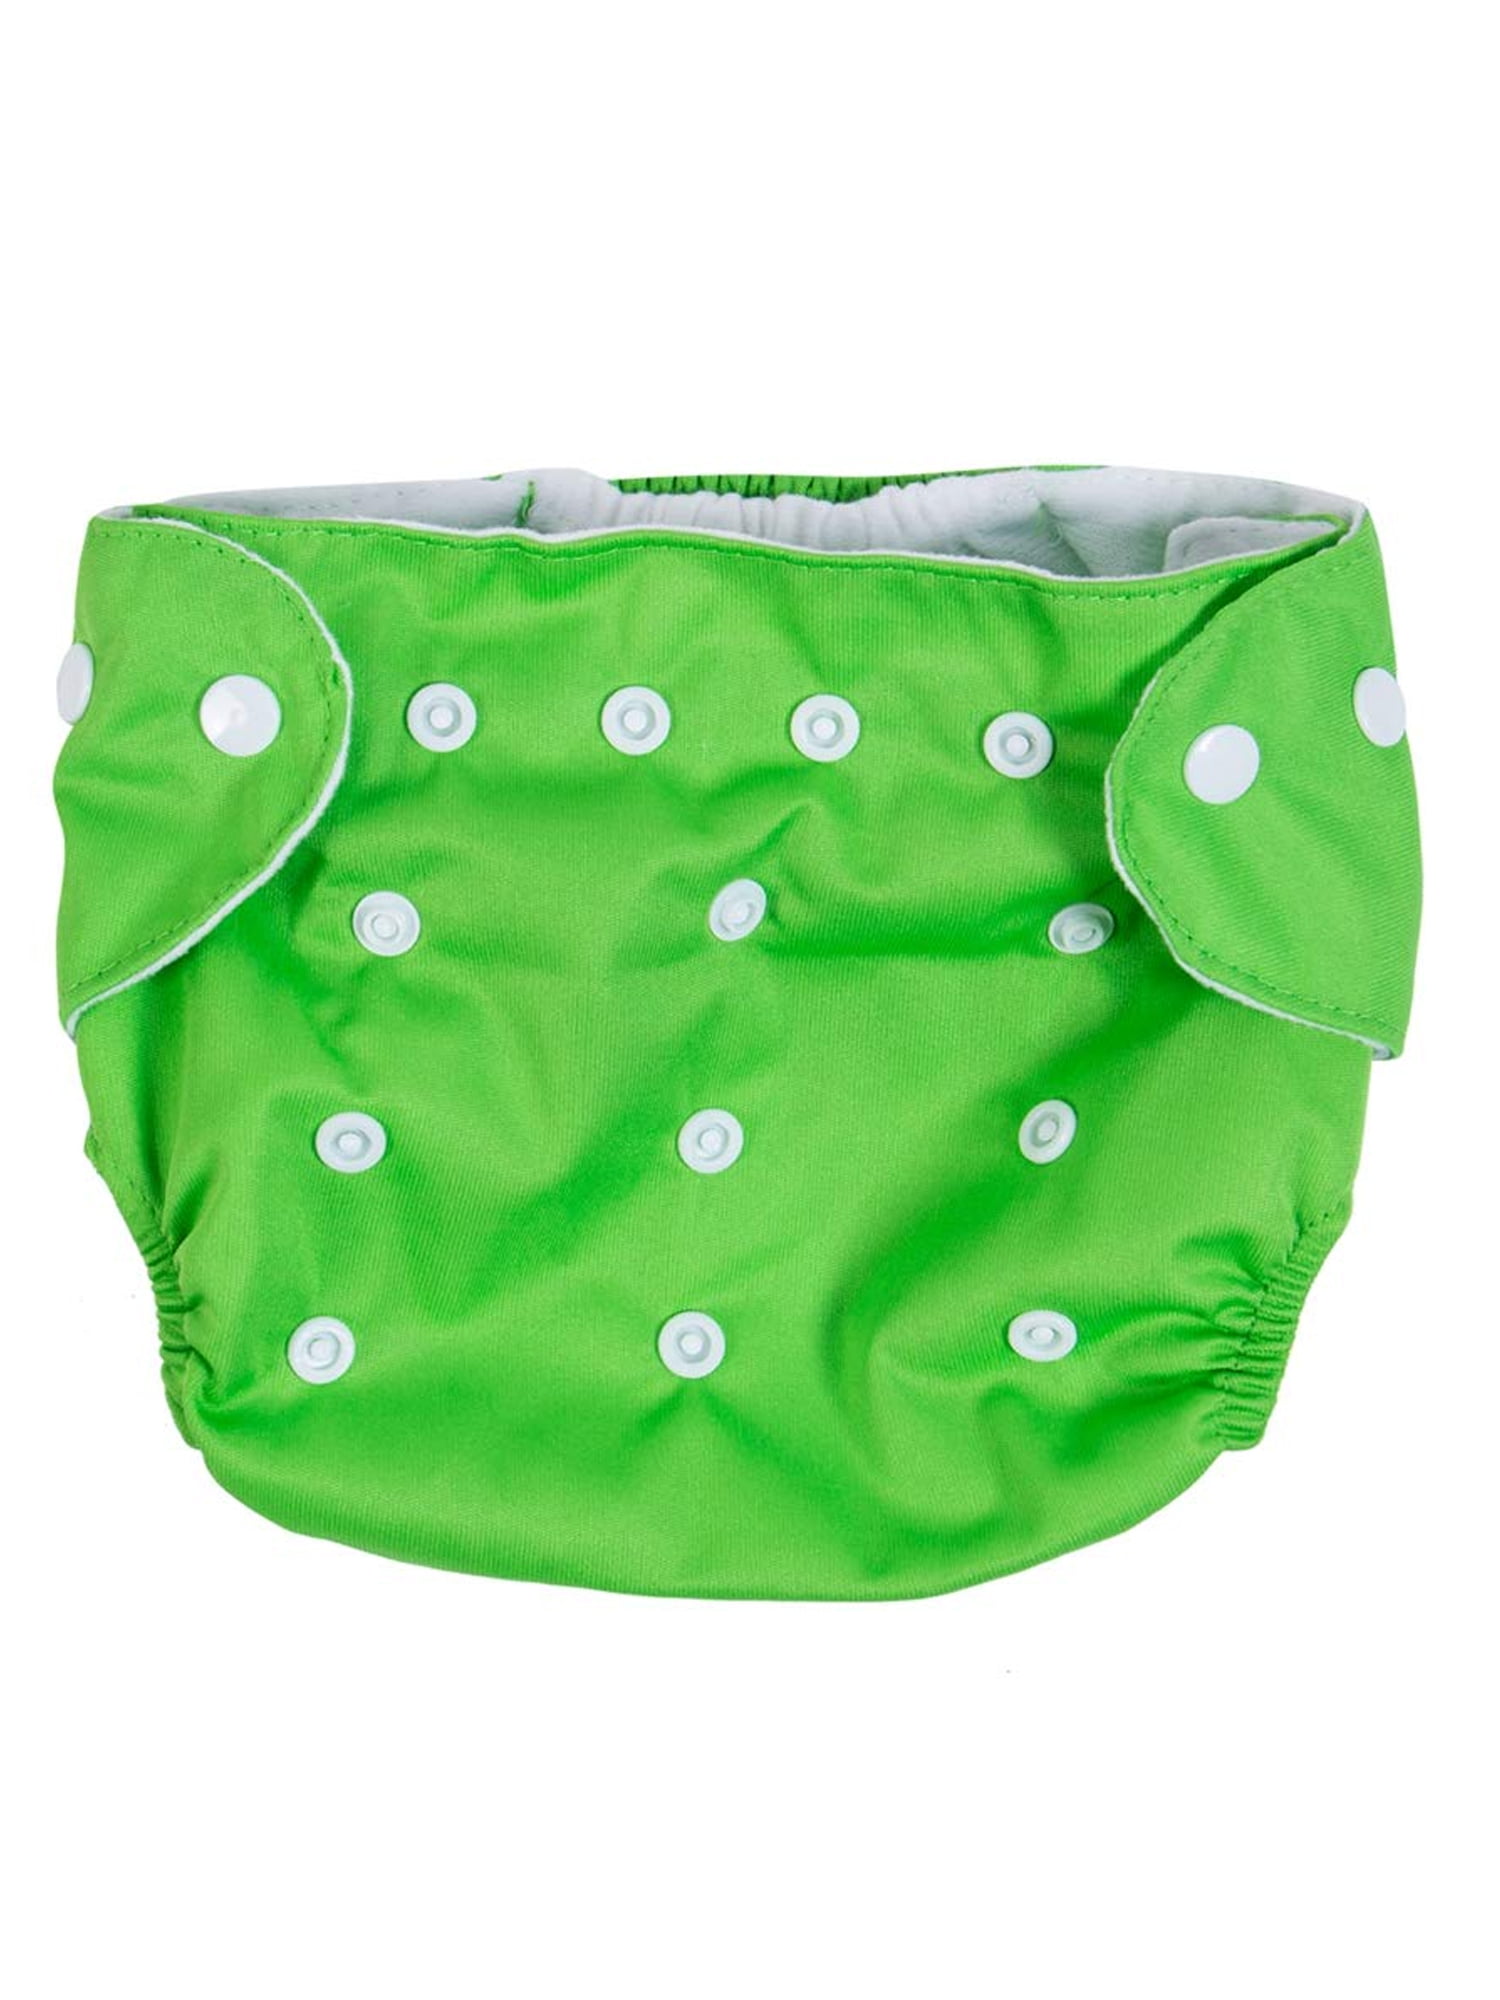 Baby Infant Reusable Washable Cloth Diaper Kids Nappy Cover Adjustable Diapers 